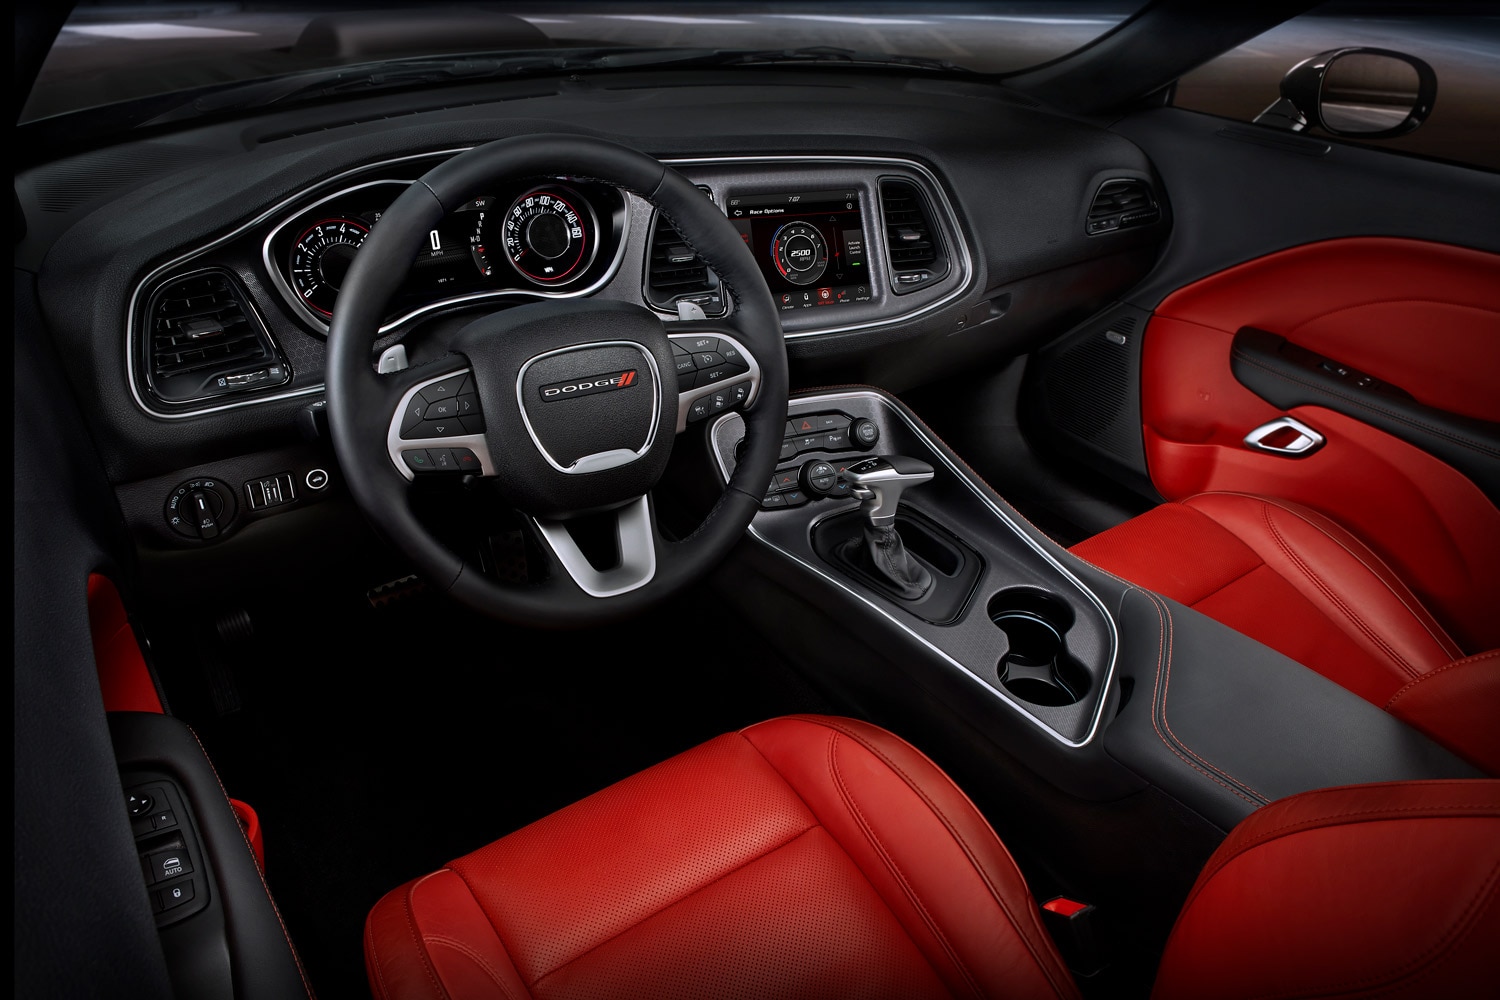 Red and black front seats and dashboard of a Dodge Challenger